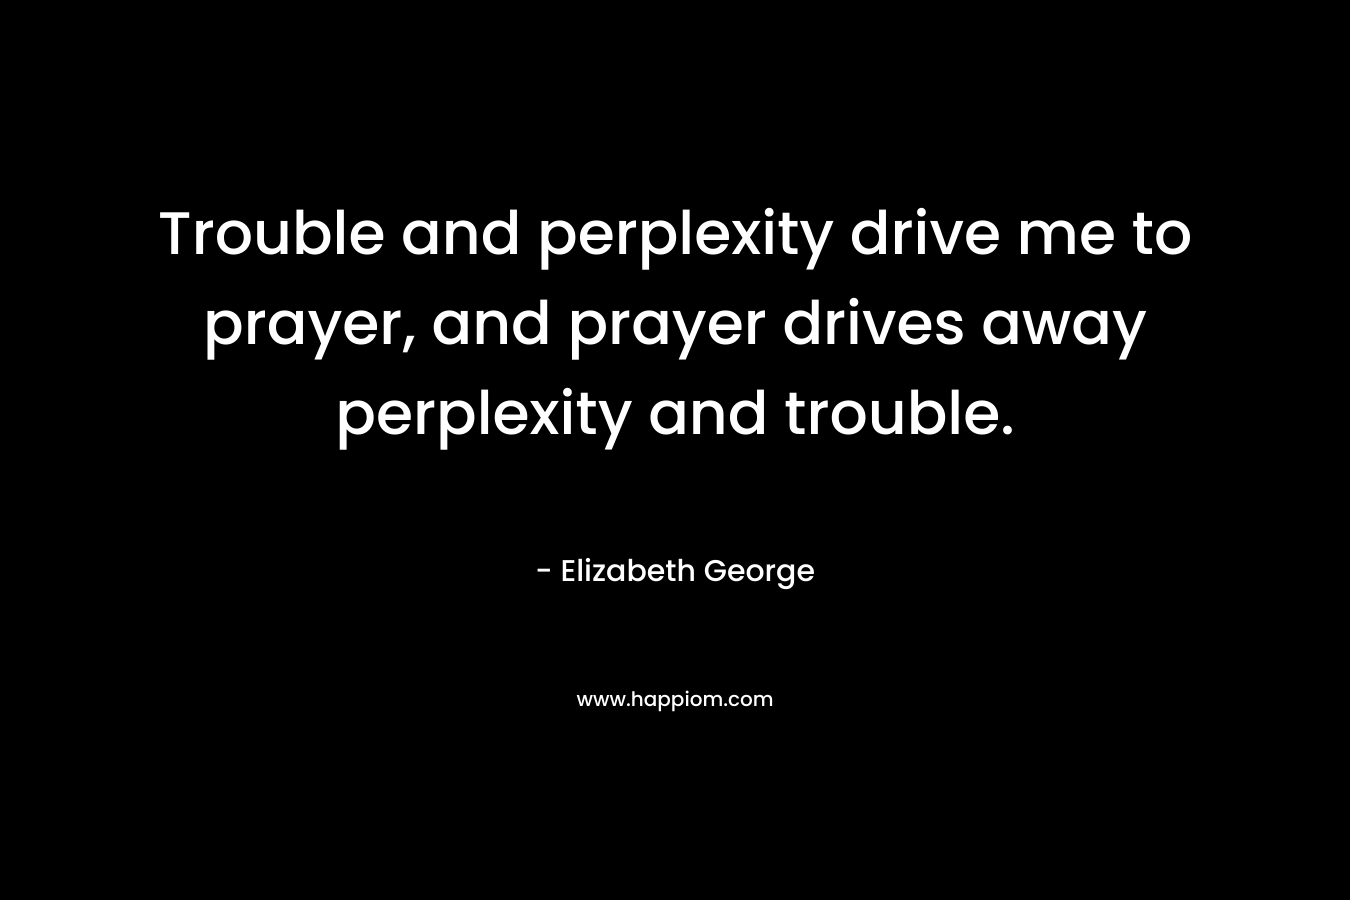 Trouble and perplexity drive me to prayer, and prayer drives away perplexity and trouble.